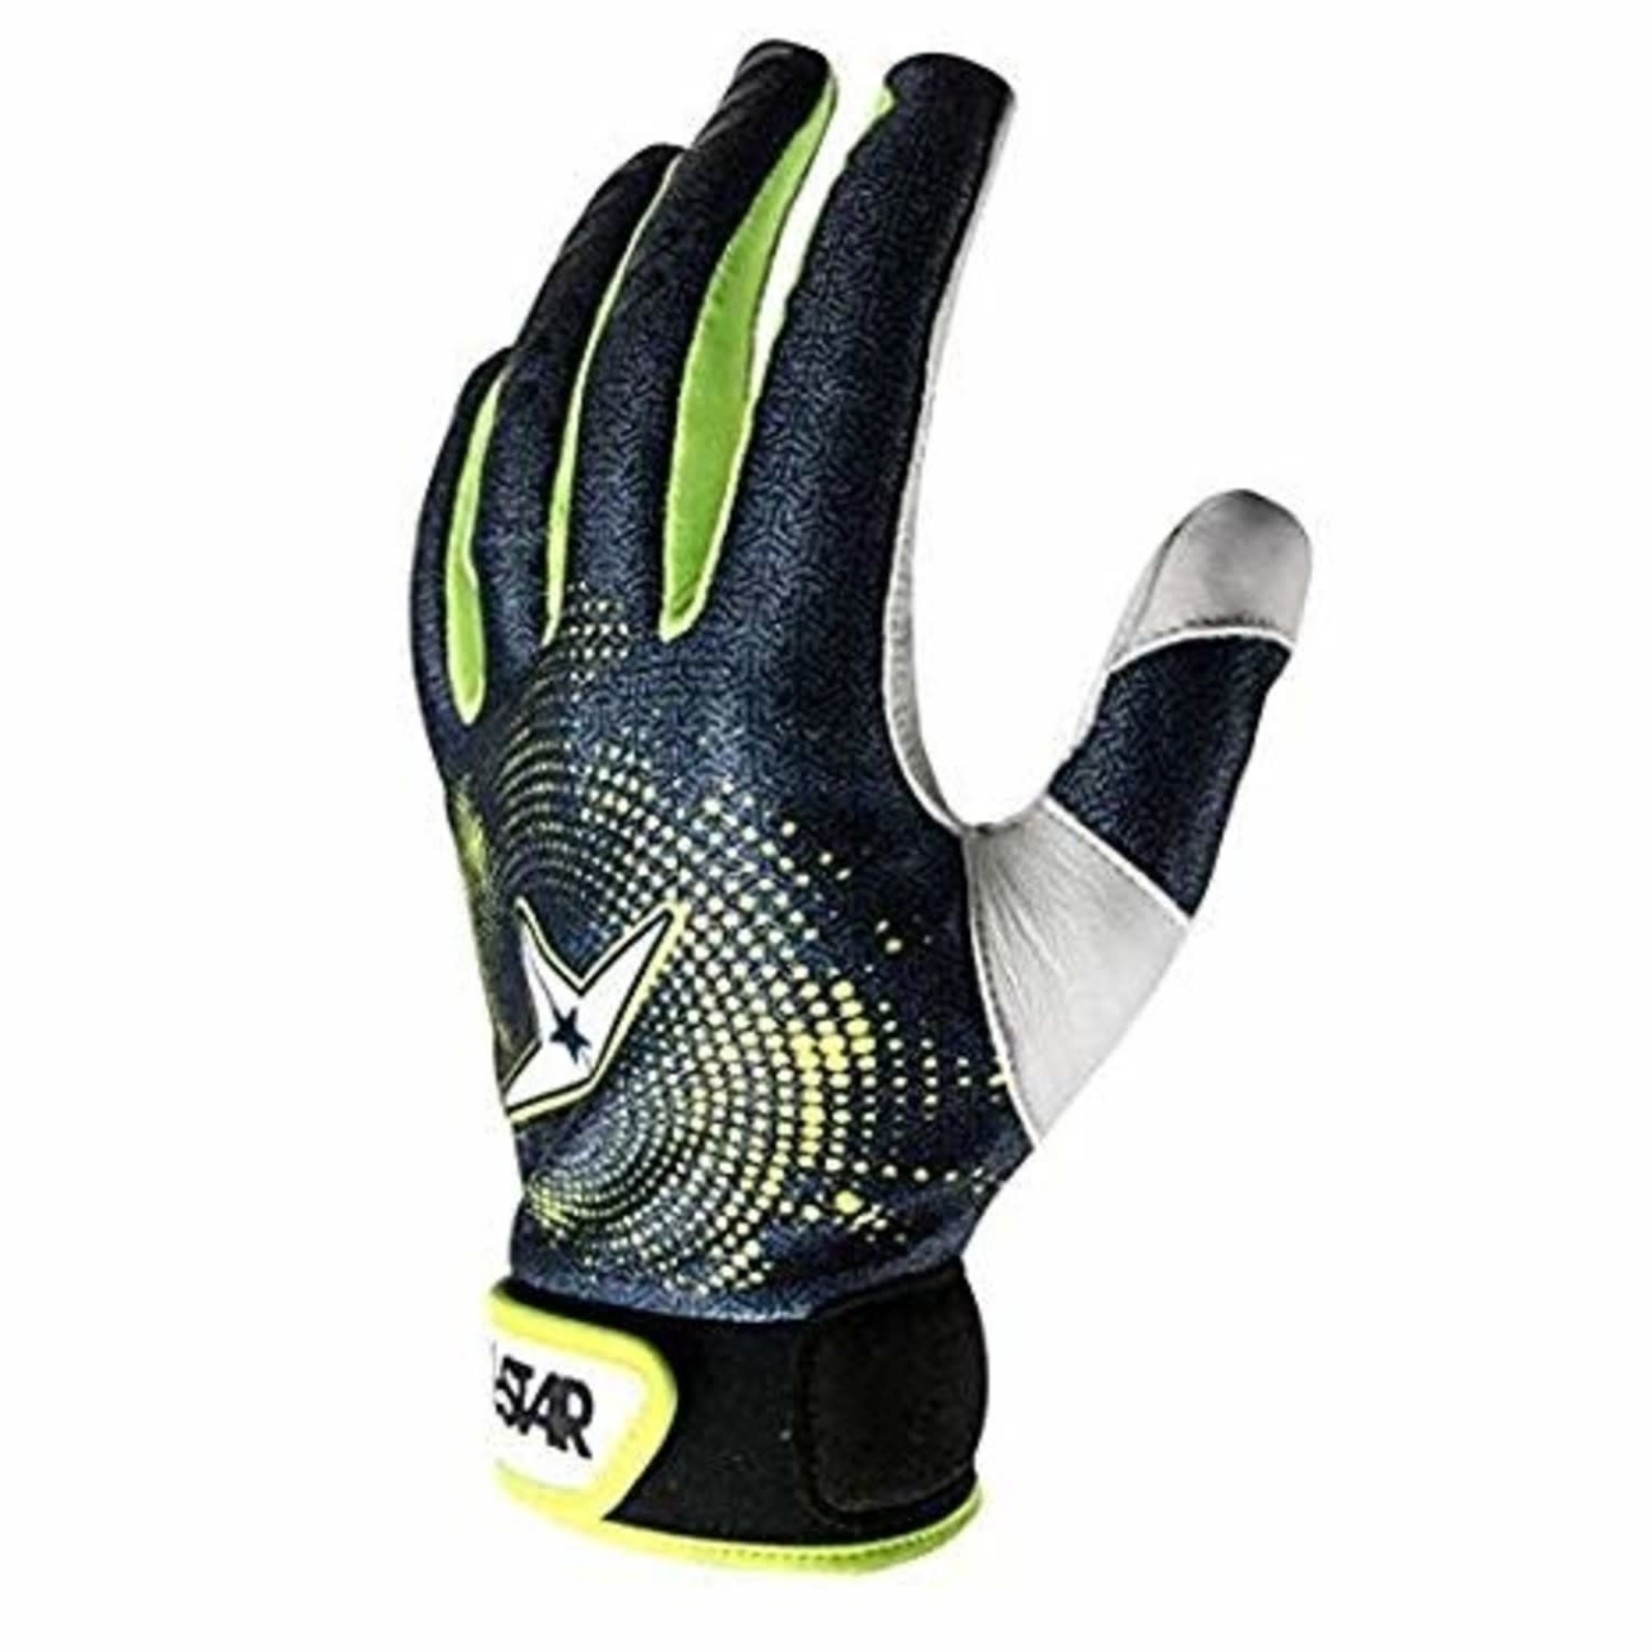 All-Star All Star Padded Inner Glove Youth